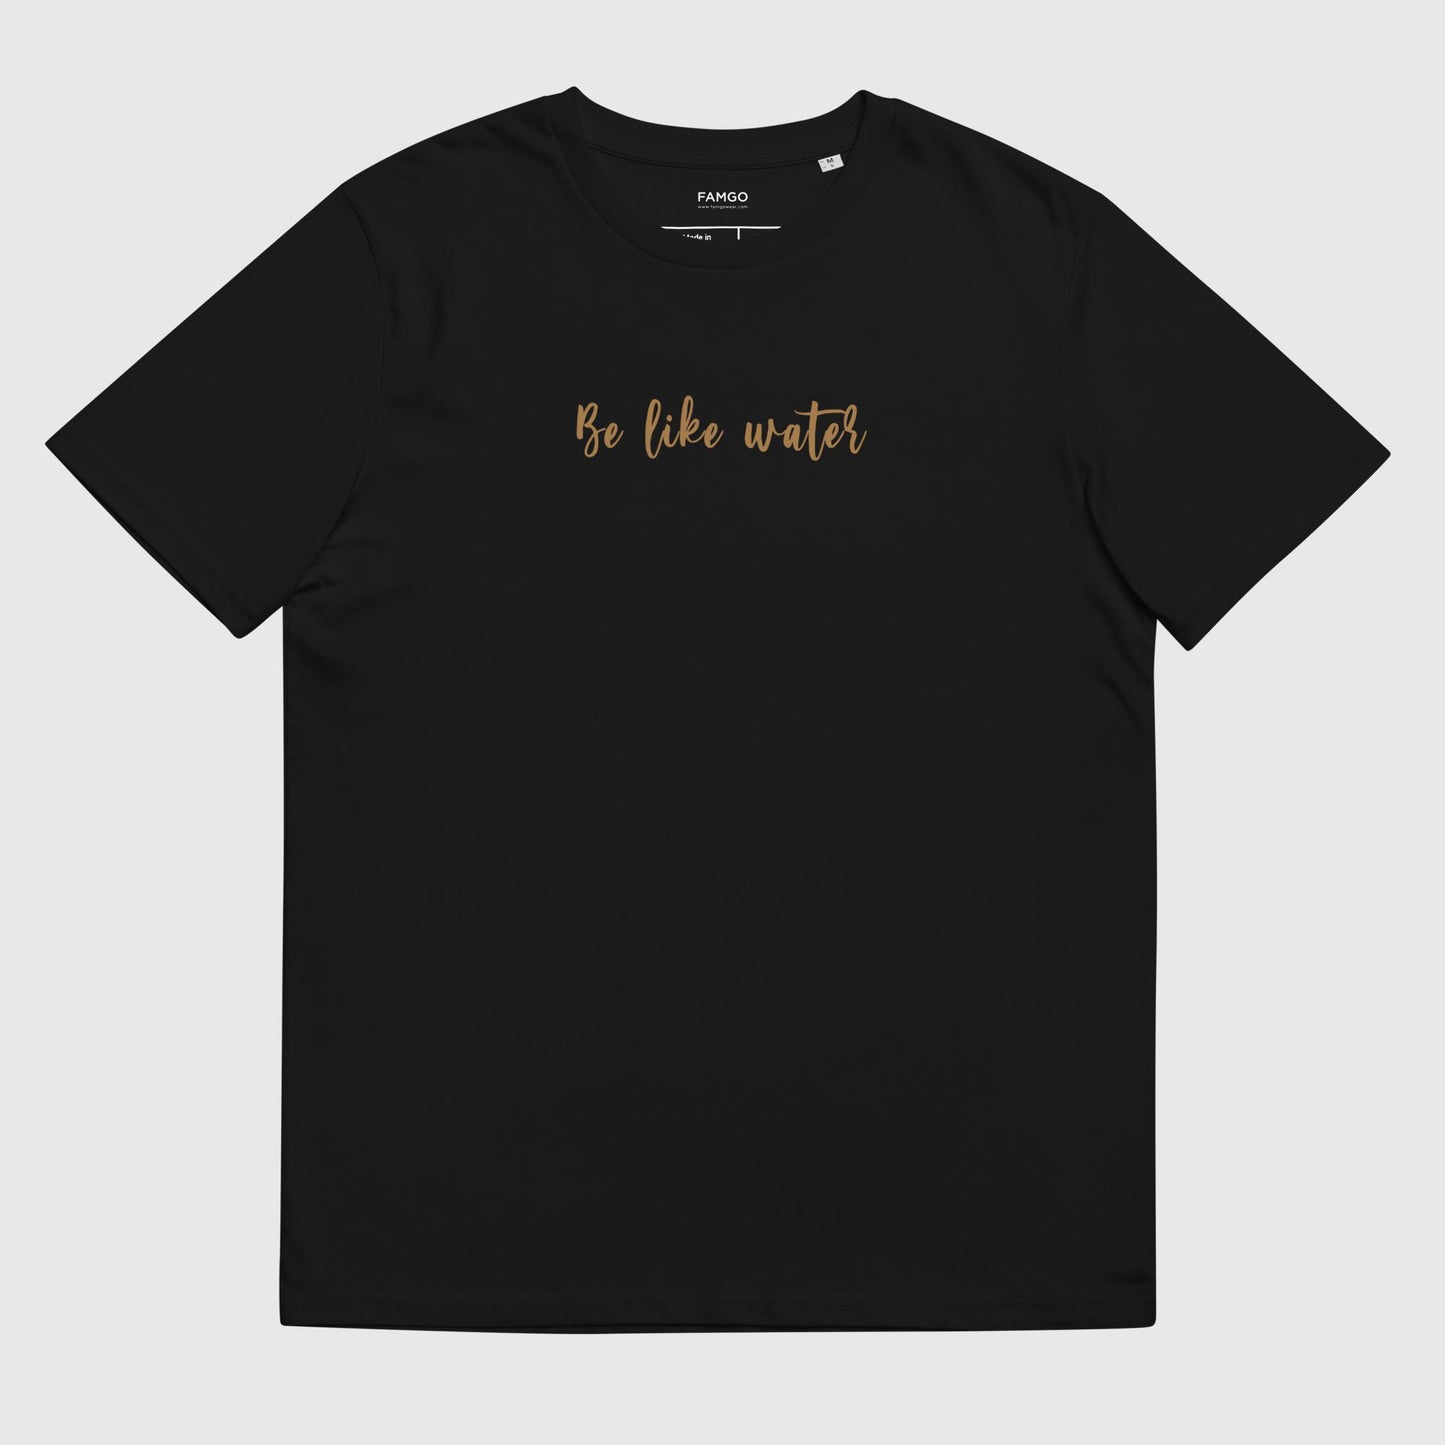 Men's black organic cotton t-shirt that features Bruce Lee's inspirational quote, "Be Like Water."